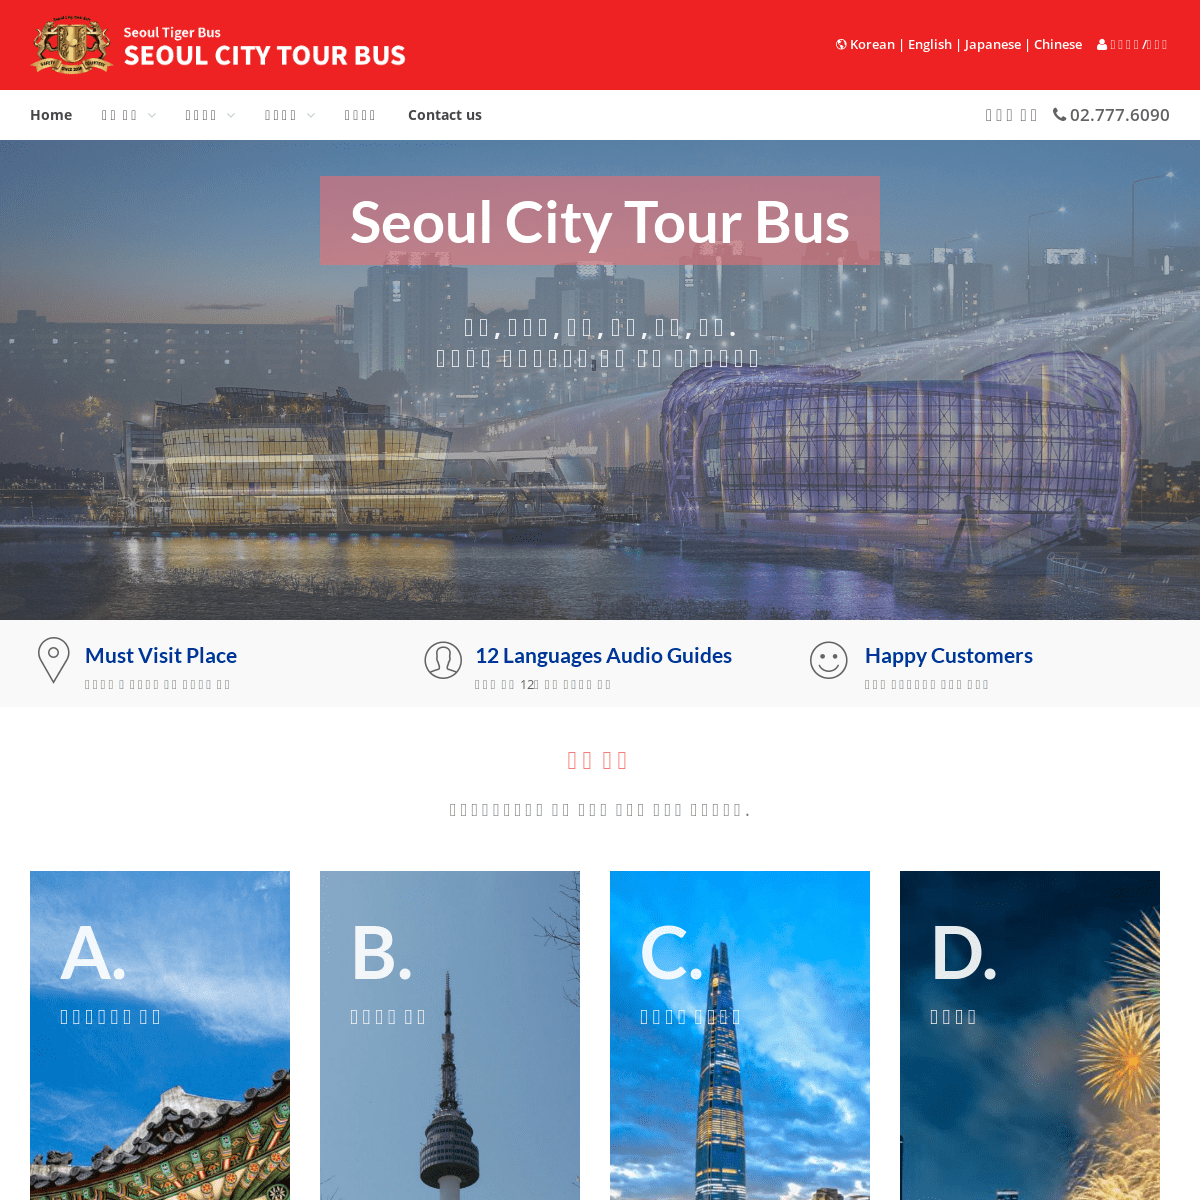 A complete backup of seoulcitybus.com